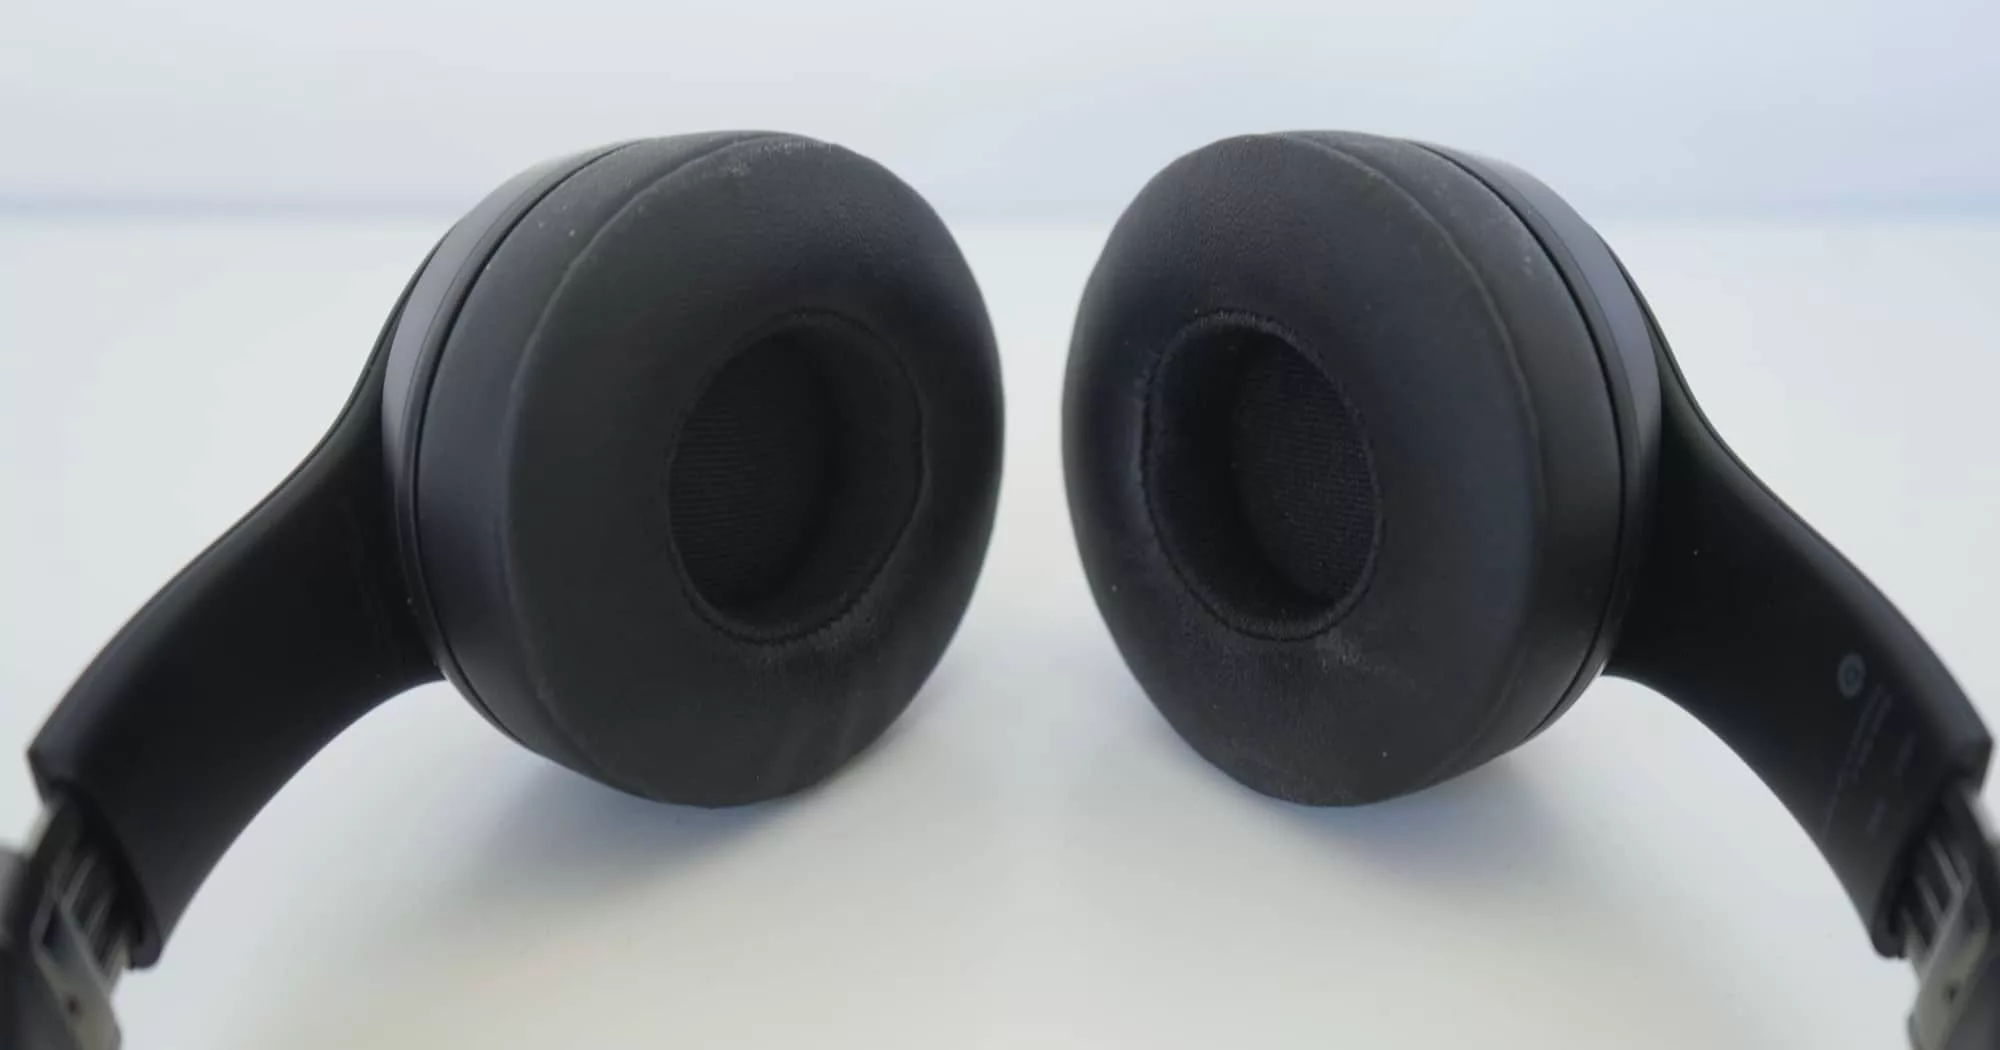 On-ear pads for the Solo 4 headphones.